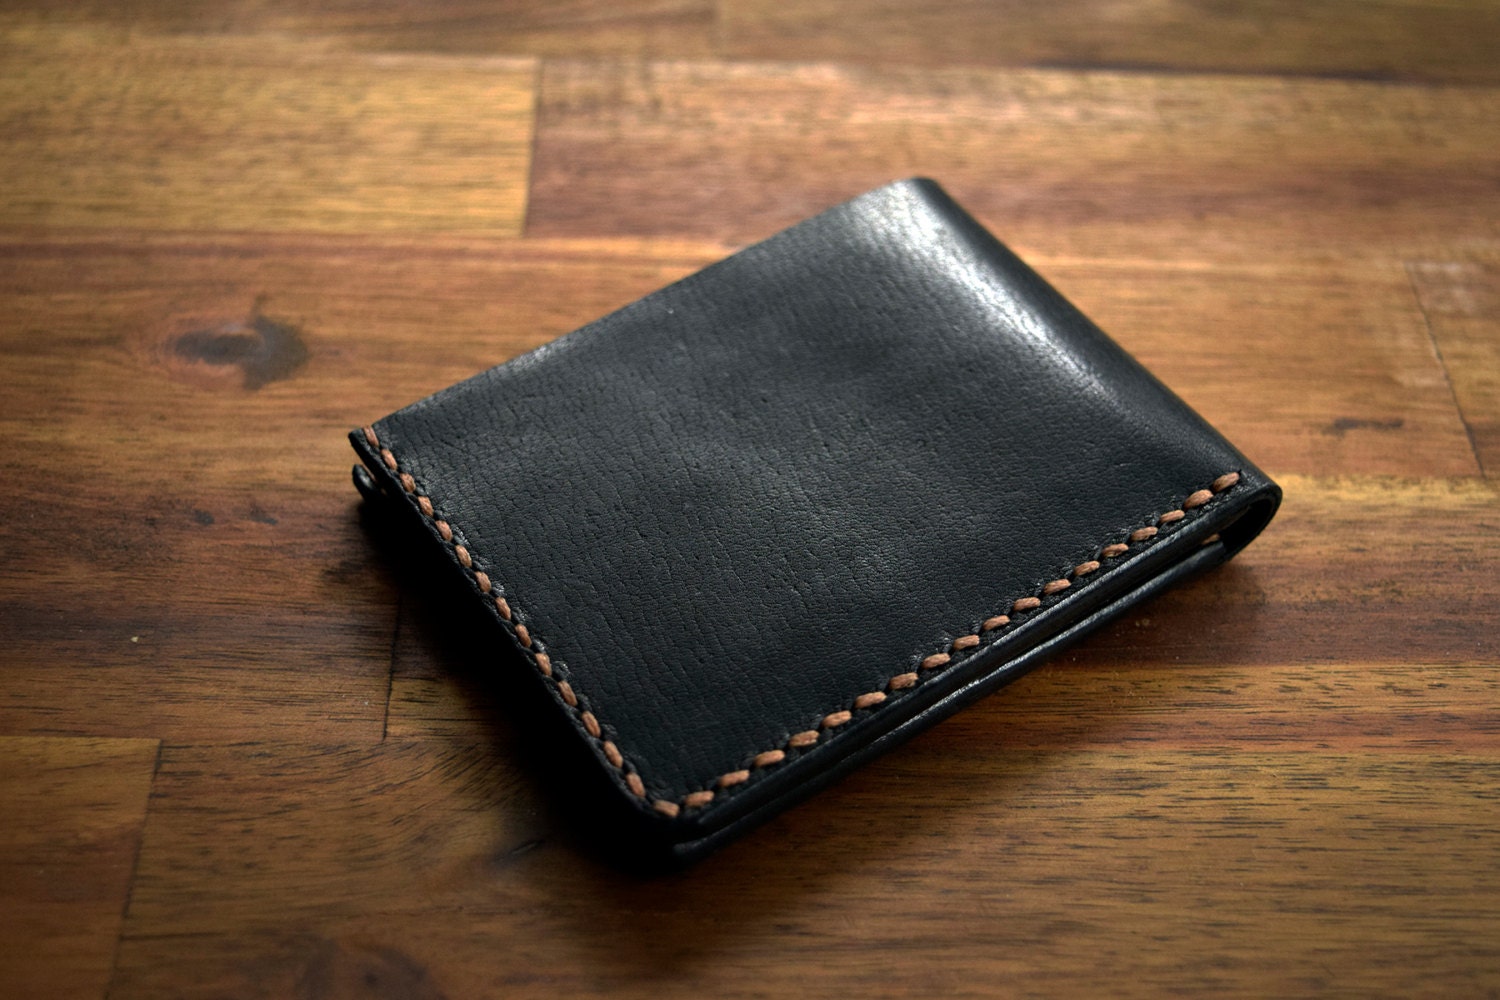 Kangaroo Leather Wallet In Cognac. — Rose Leather Crafting